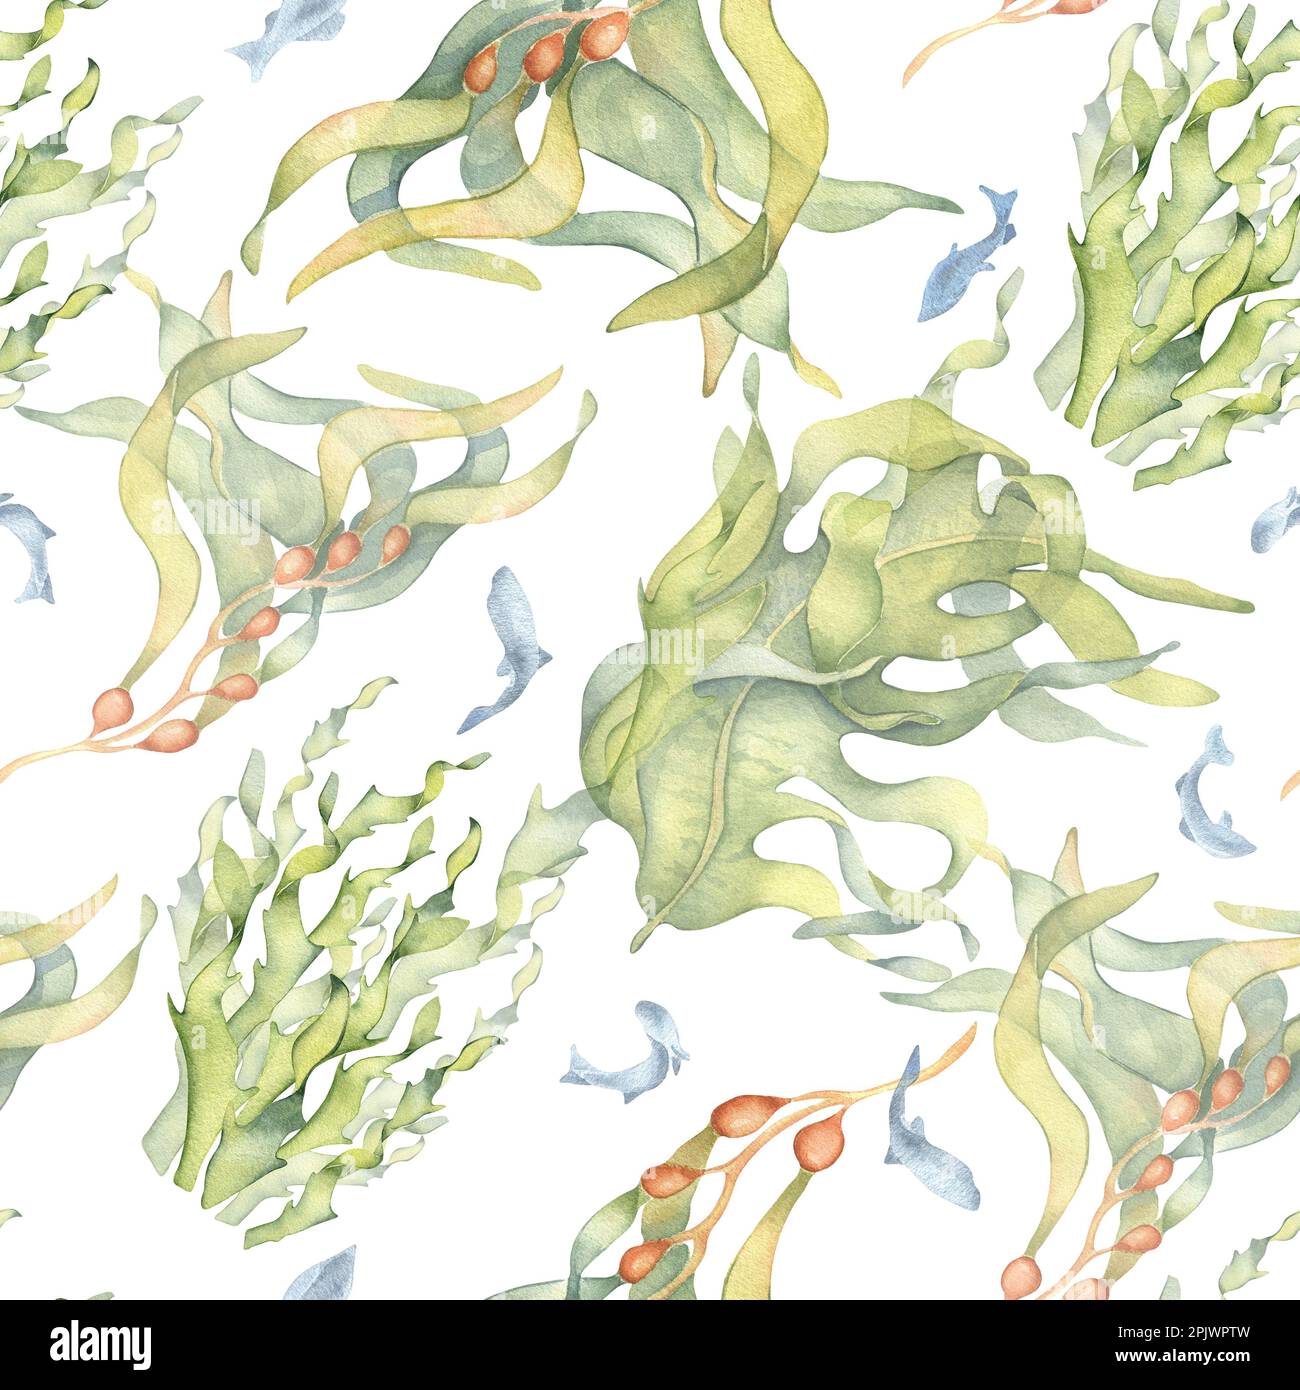 Seamless pattern of colorful sea plants watercolor illustration isolated on white. Laminaria, kelp, herb seaweeds hand drawn. Design for background, t Stock Photo